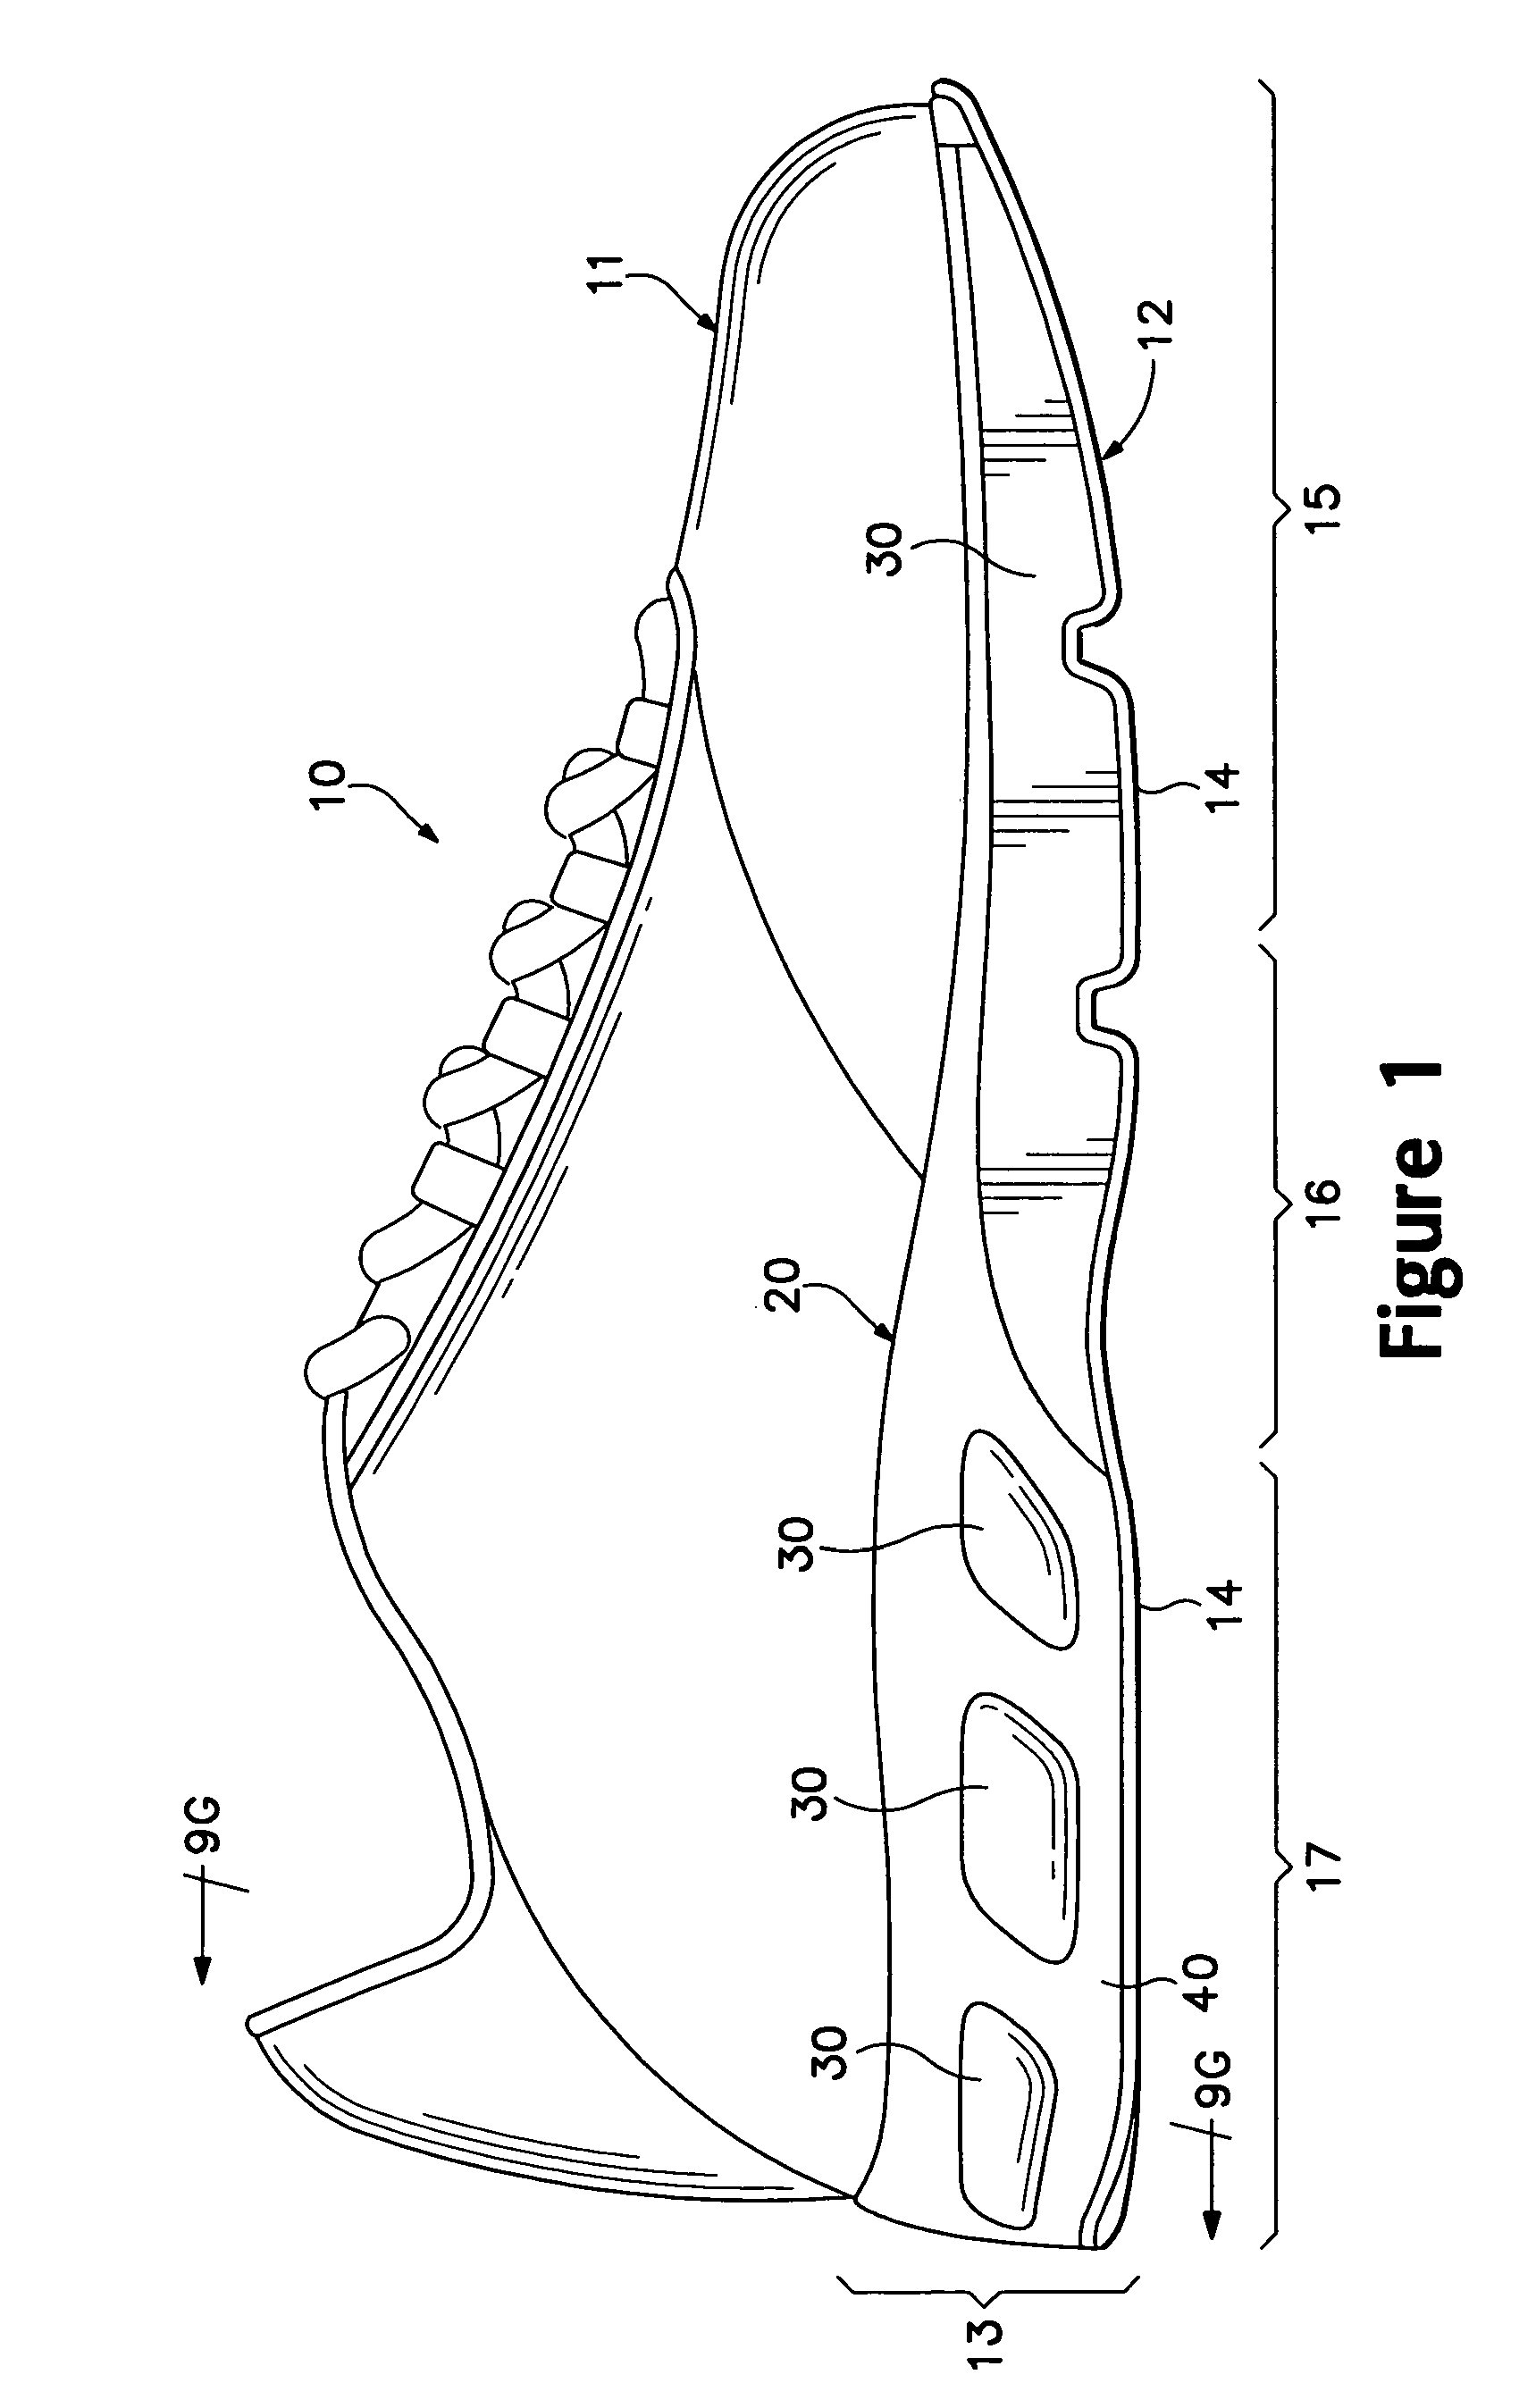 Article of footwear having a fluid-filled bladder with a reinforcing structure